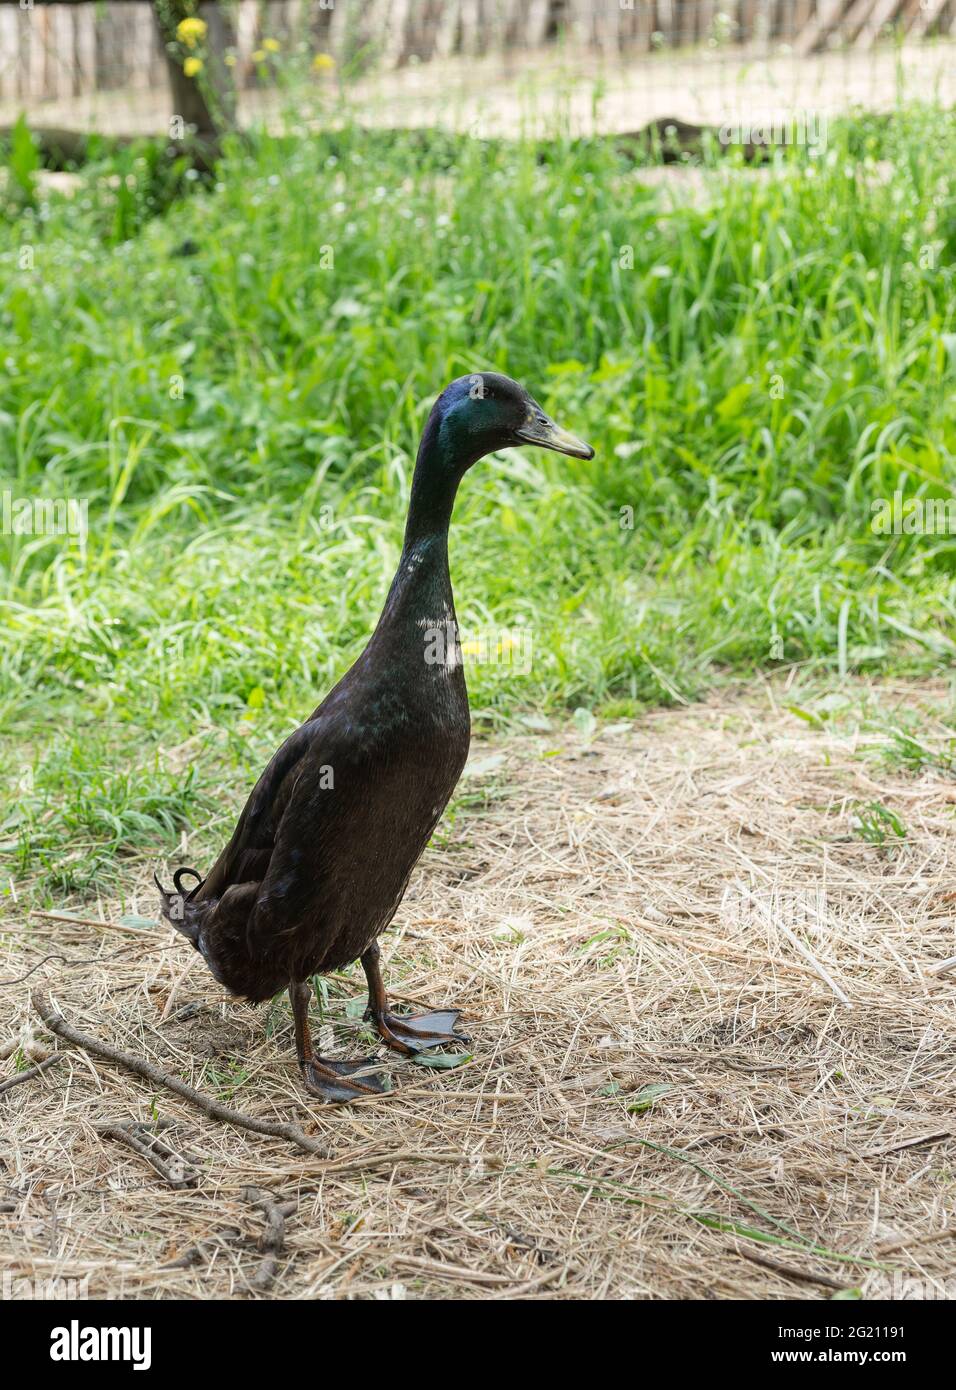 Indian Runner duck-decorative meat - eating duck popular with poultry farmers in different countries - on green grass Stock Photo